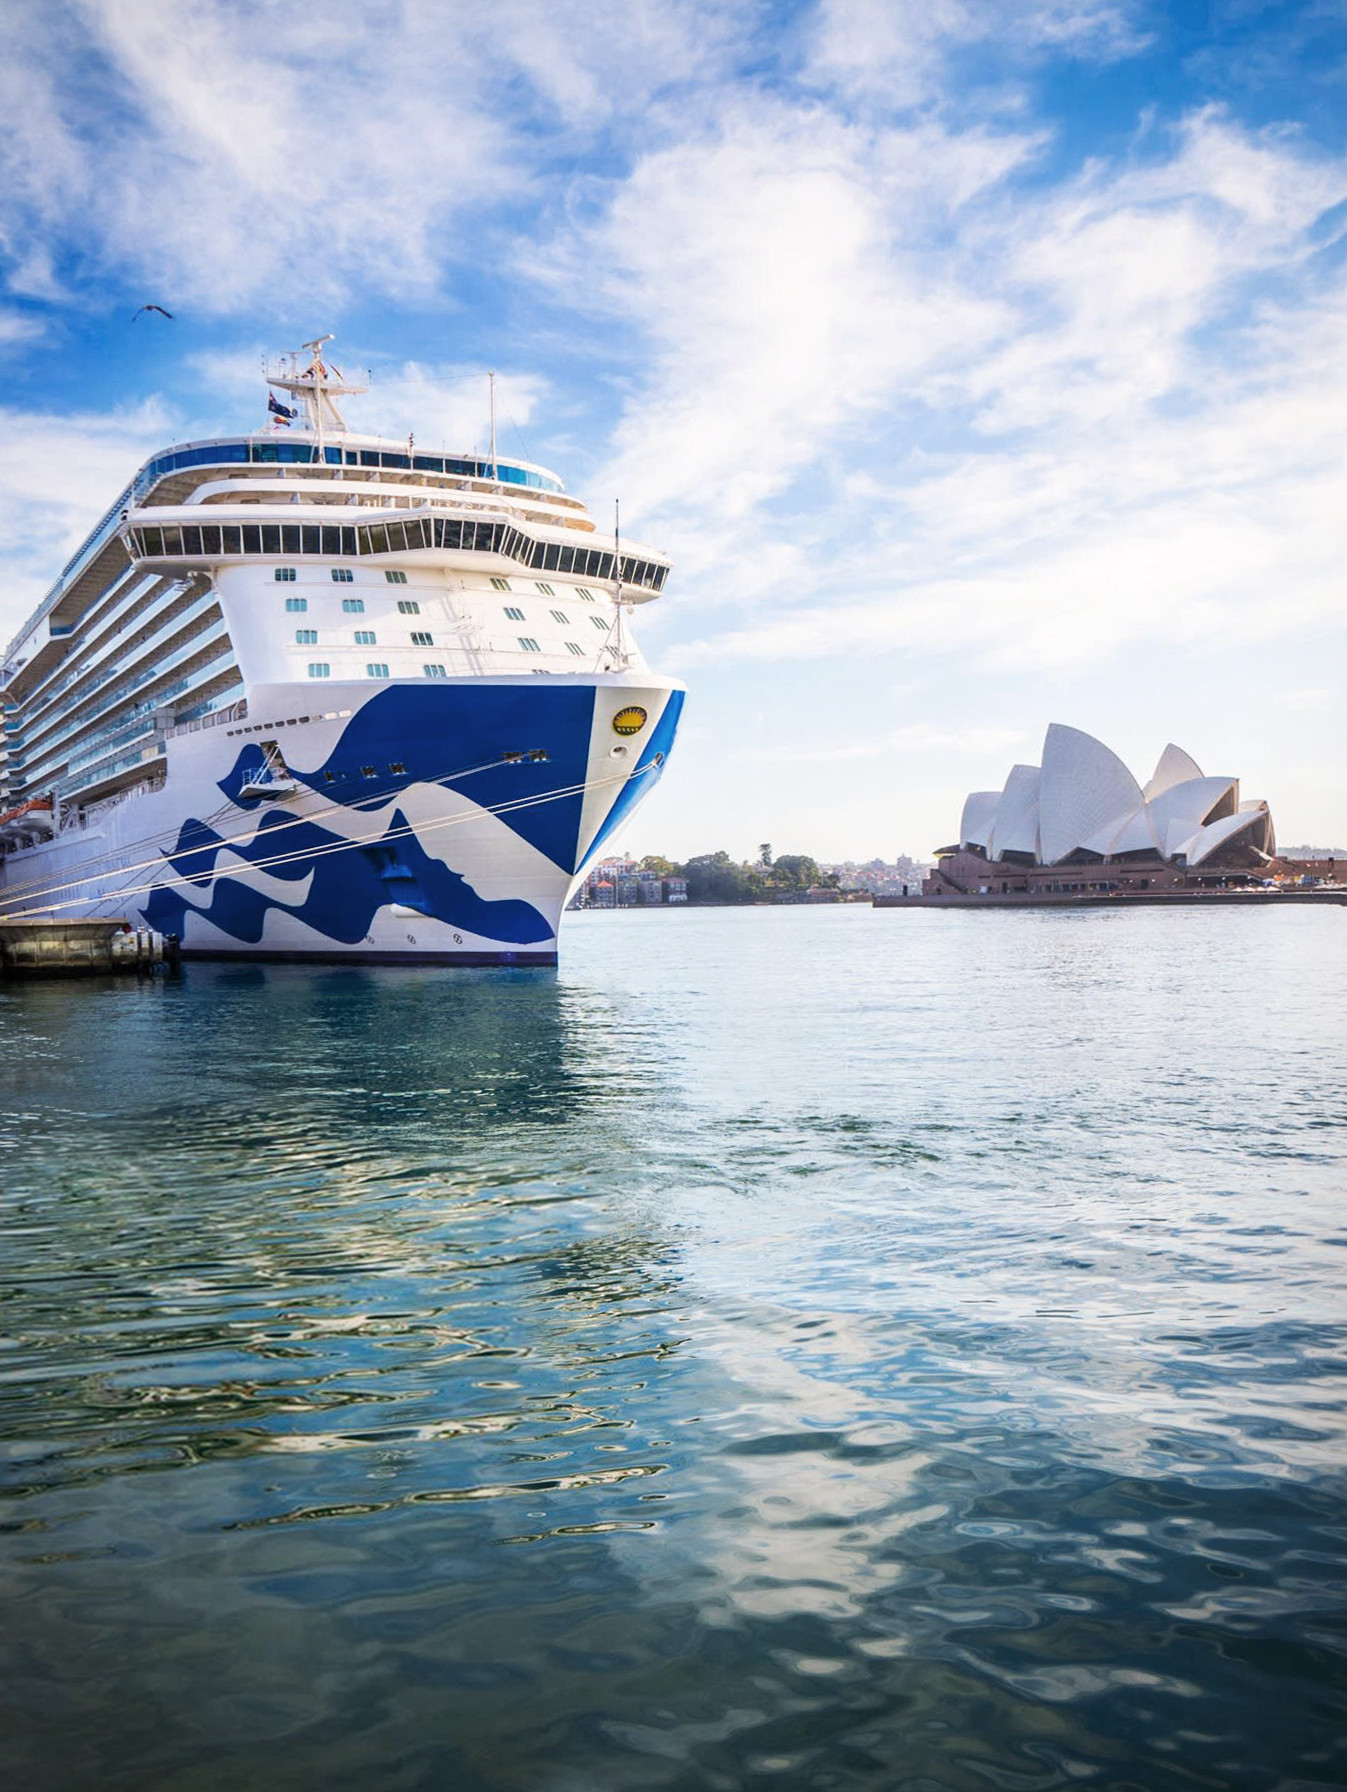 Cruise from Sydney to Vancouver on Majestic Princess from $151 per person per night